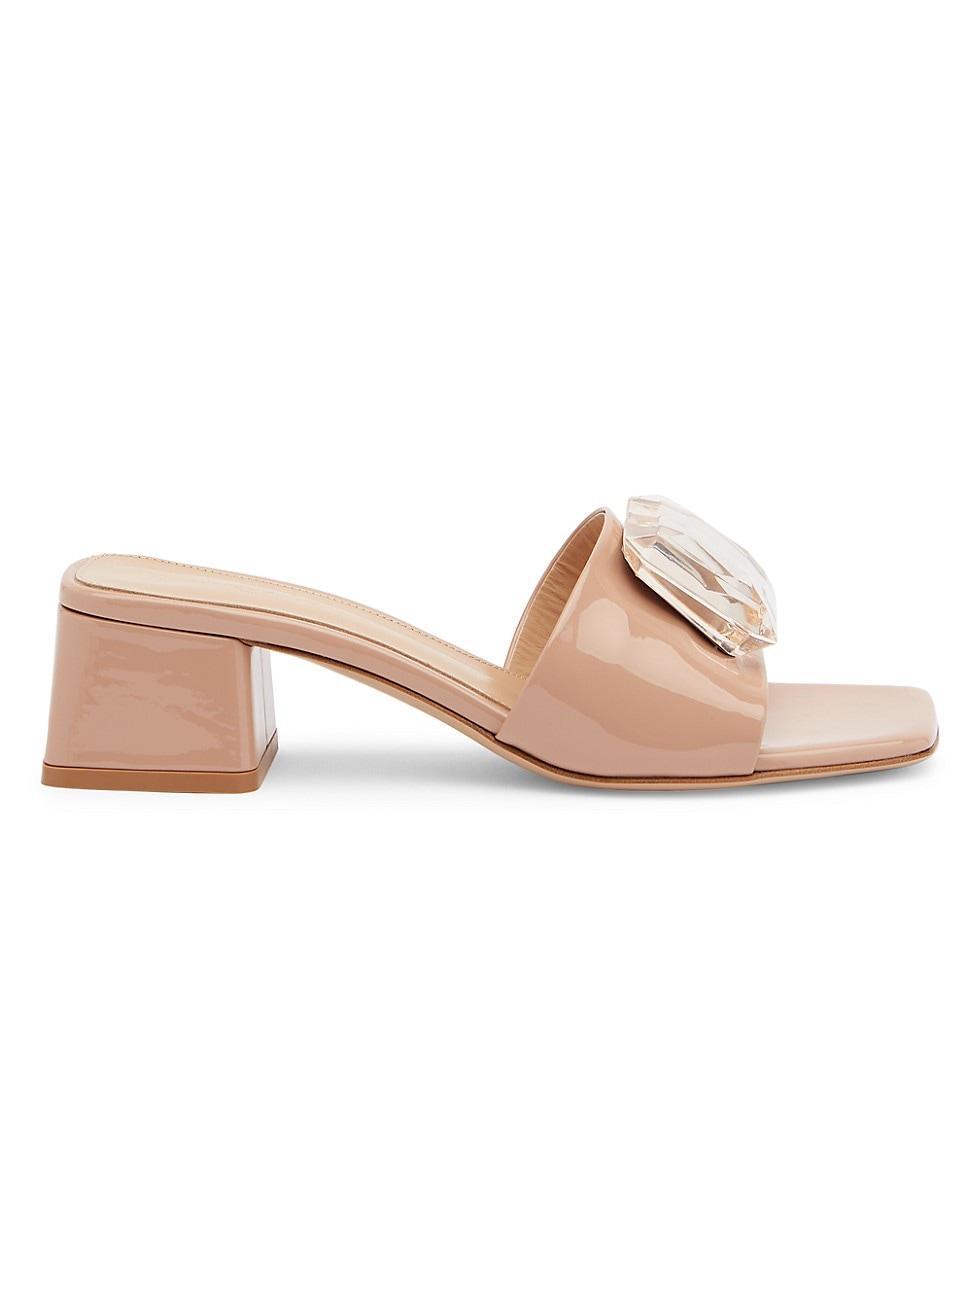 Womens Jaipur 45MM Leather Mules Product Image